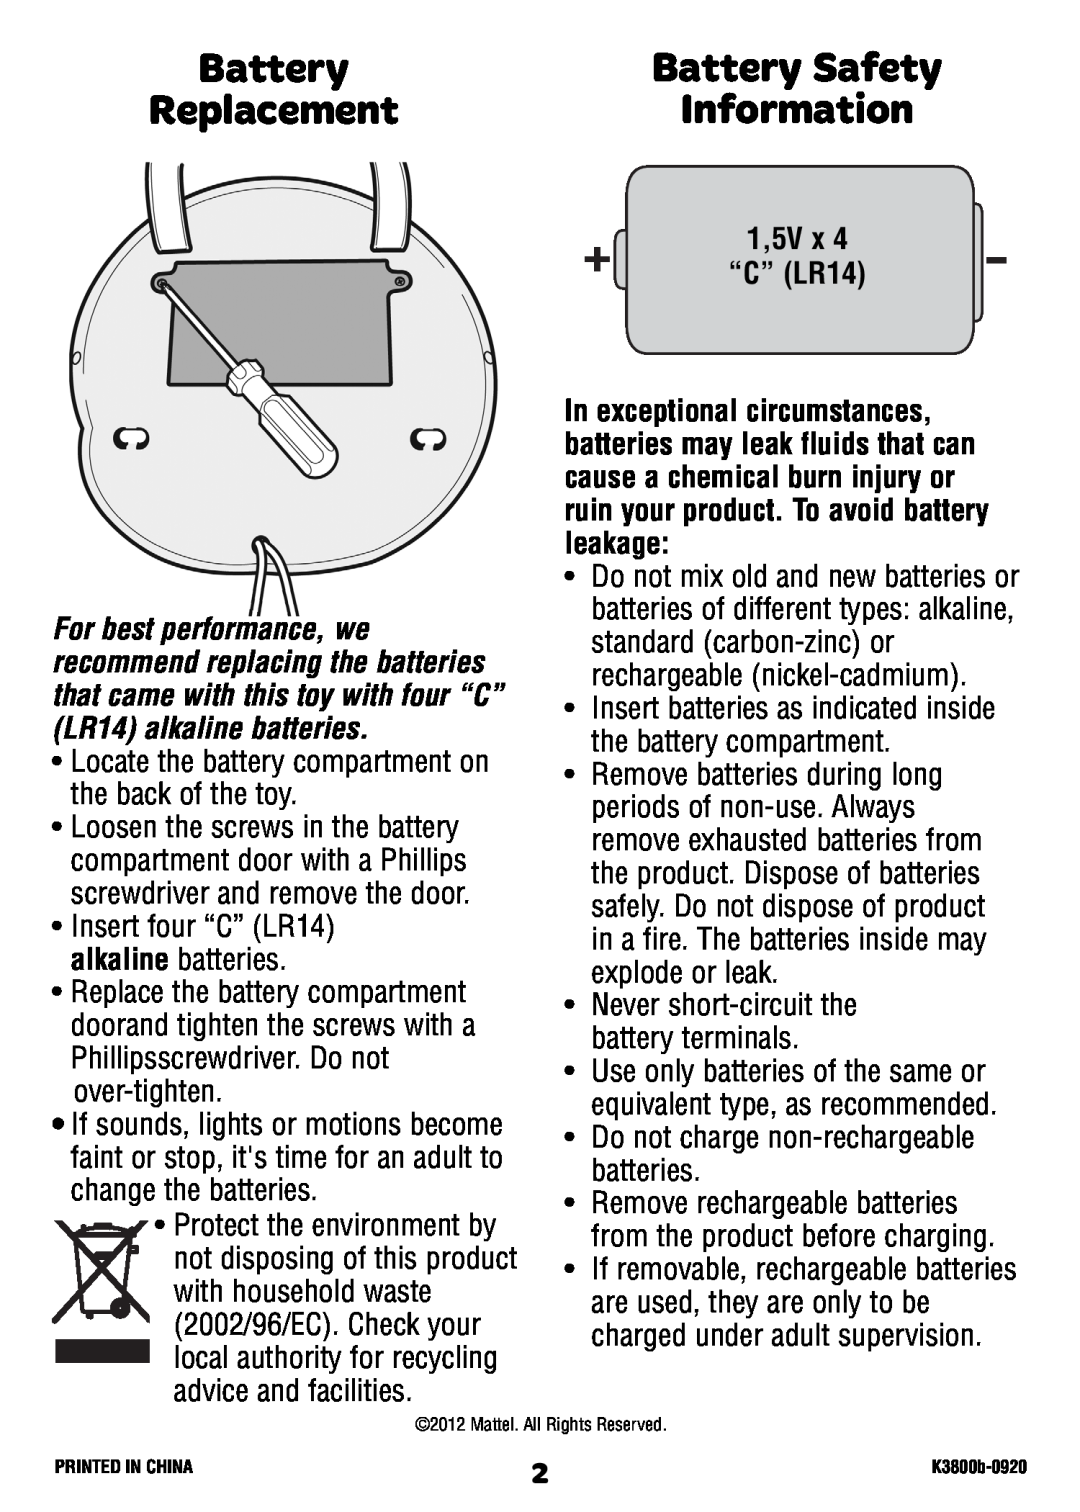 Fisher-Price K3800 instruction sheet Battery Safety, 1,5V x “C” LR14, Information, Replacement 